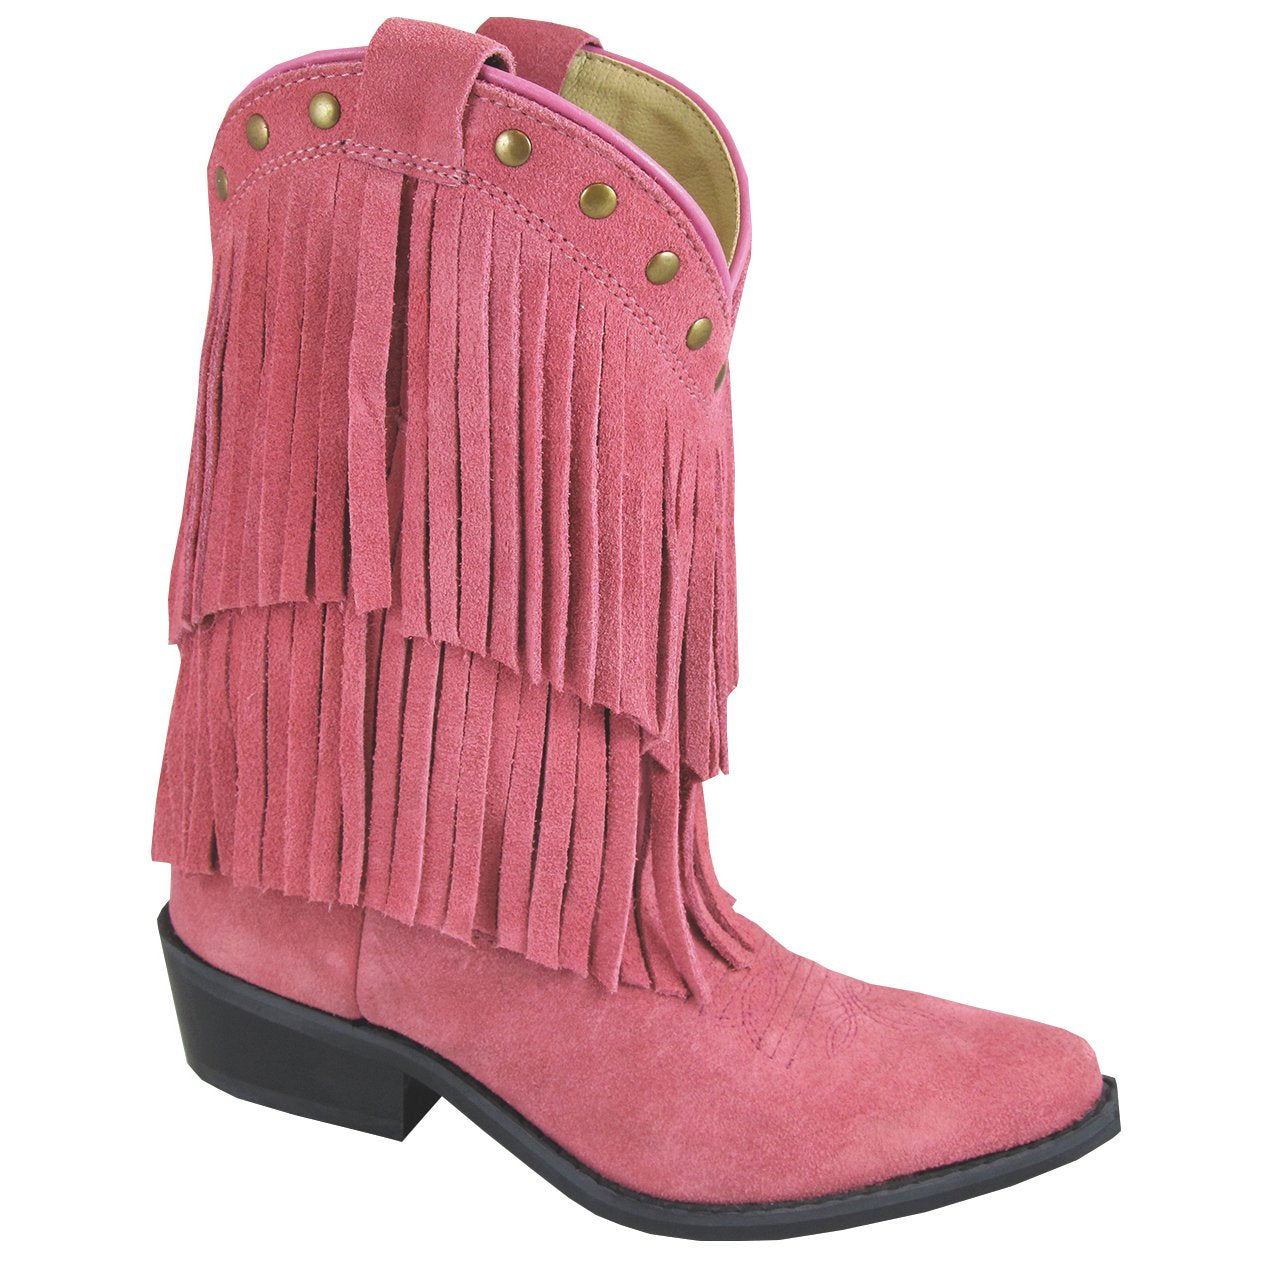 Smoky Mountain Girl's Children's Wisteria Pink Double Fringe Boot